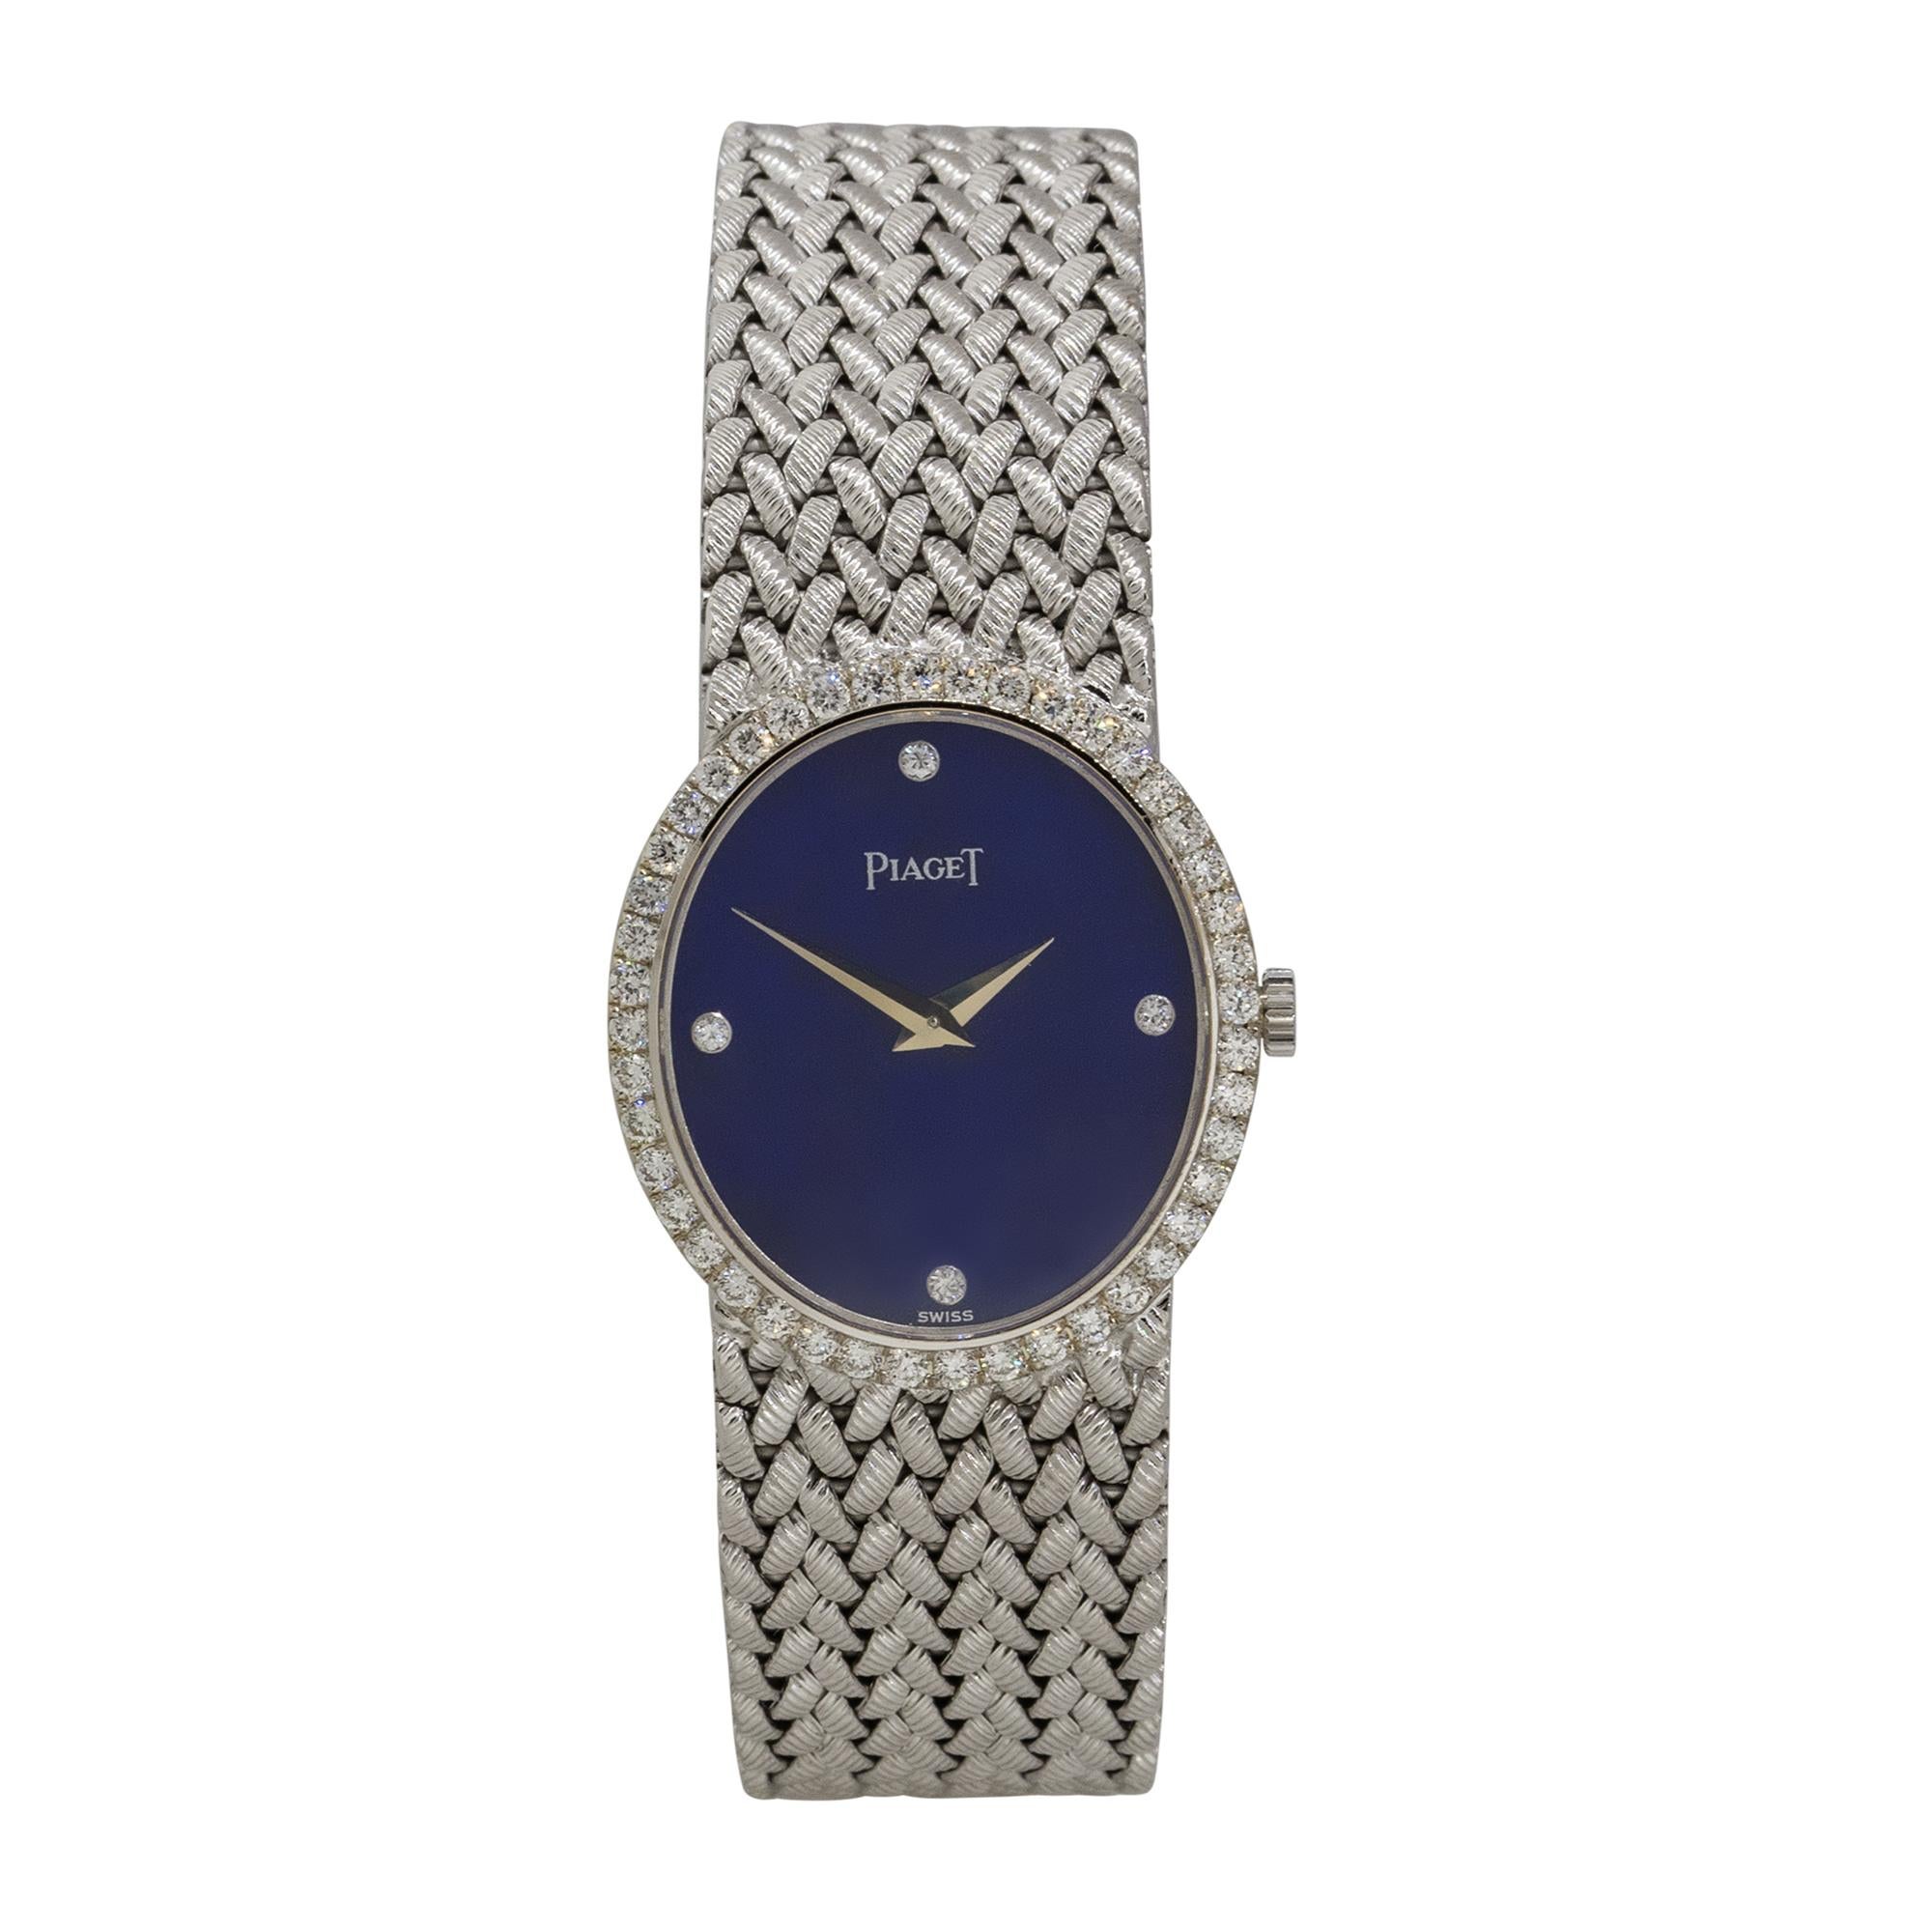 Brand: Piaget
Case Material: 18k White Gold
Case Diameter: 24mm
Crystal: Sapphire Crystal
Bezel: 18k White Gold Diamond Bezel
Dial: Blue lapis dial with Diamond hour markers
Bracelet: 18k White Gold
Size: Will fit a 6